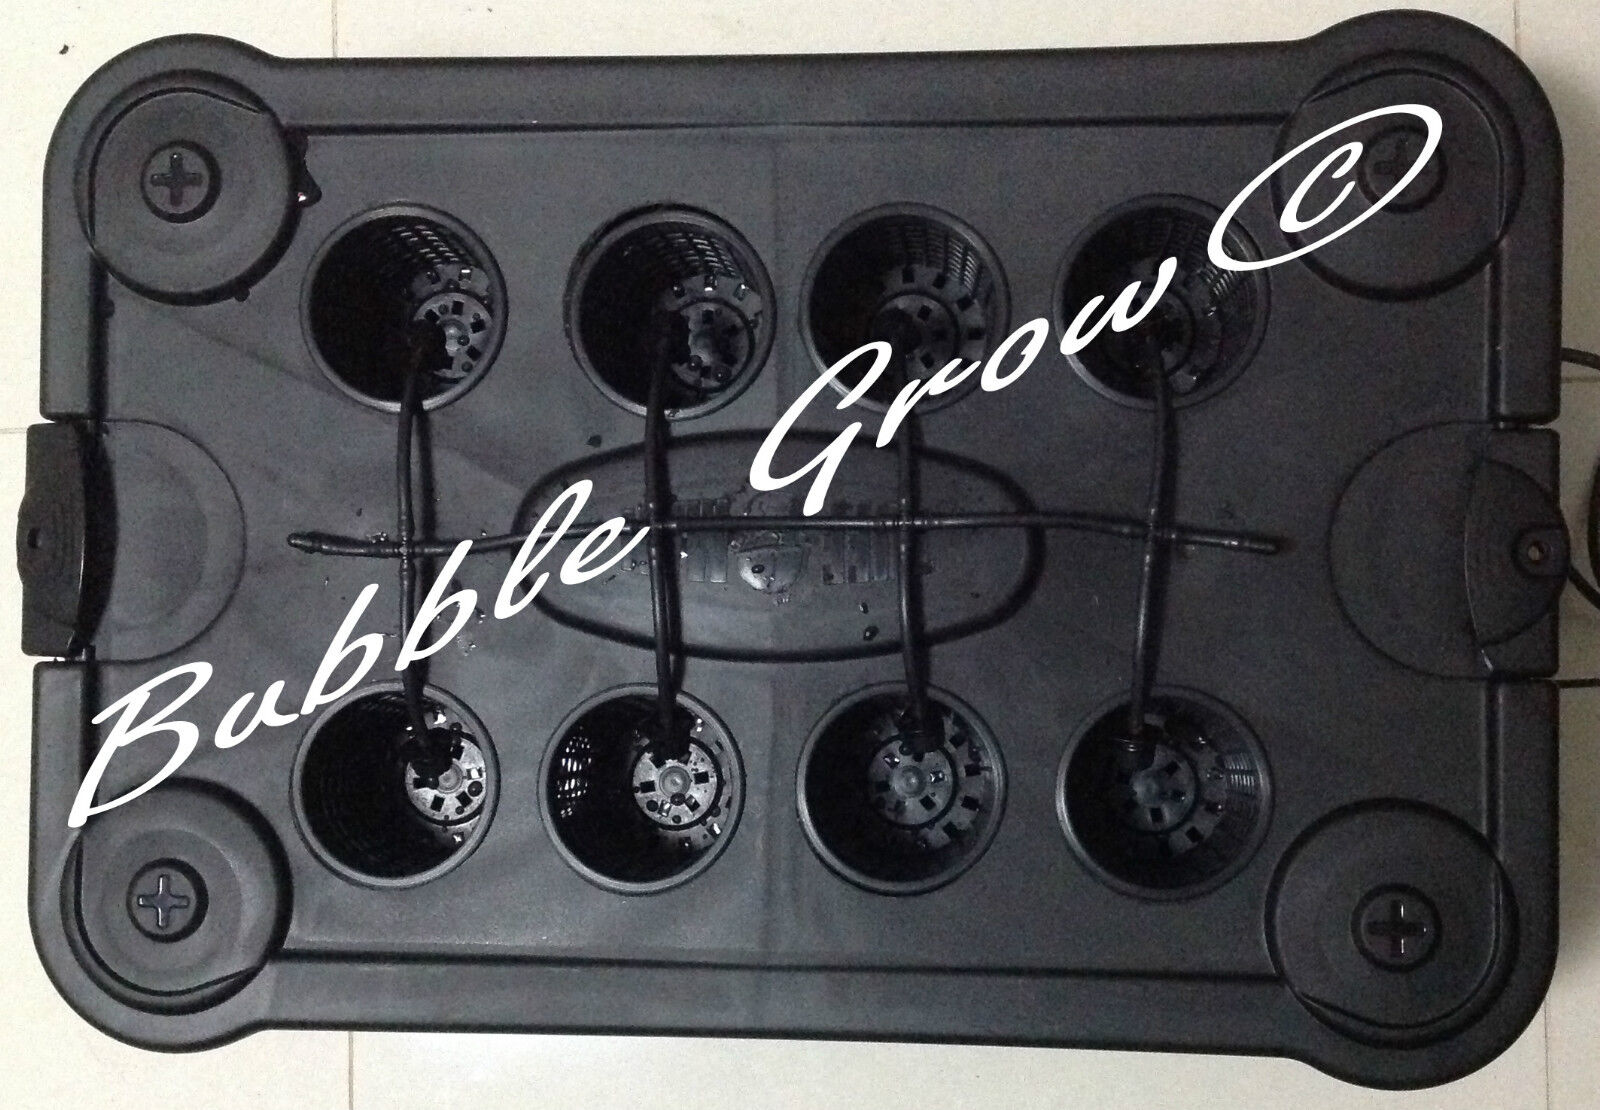 Bubble Grow PRO 8 Drip Hydroponic System Top Feed Bubbleponic DWC Growing Kit